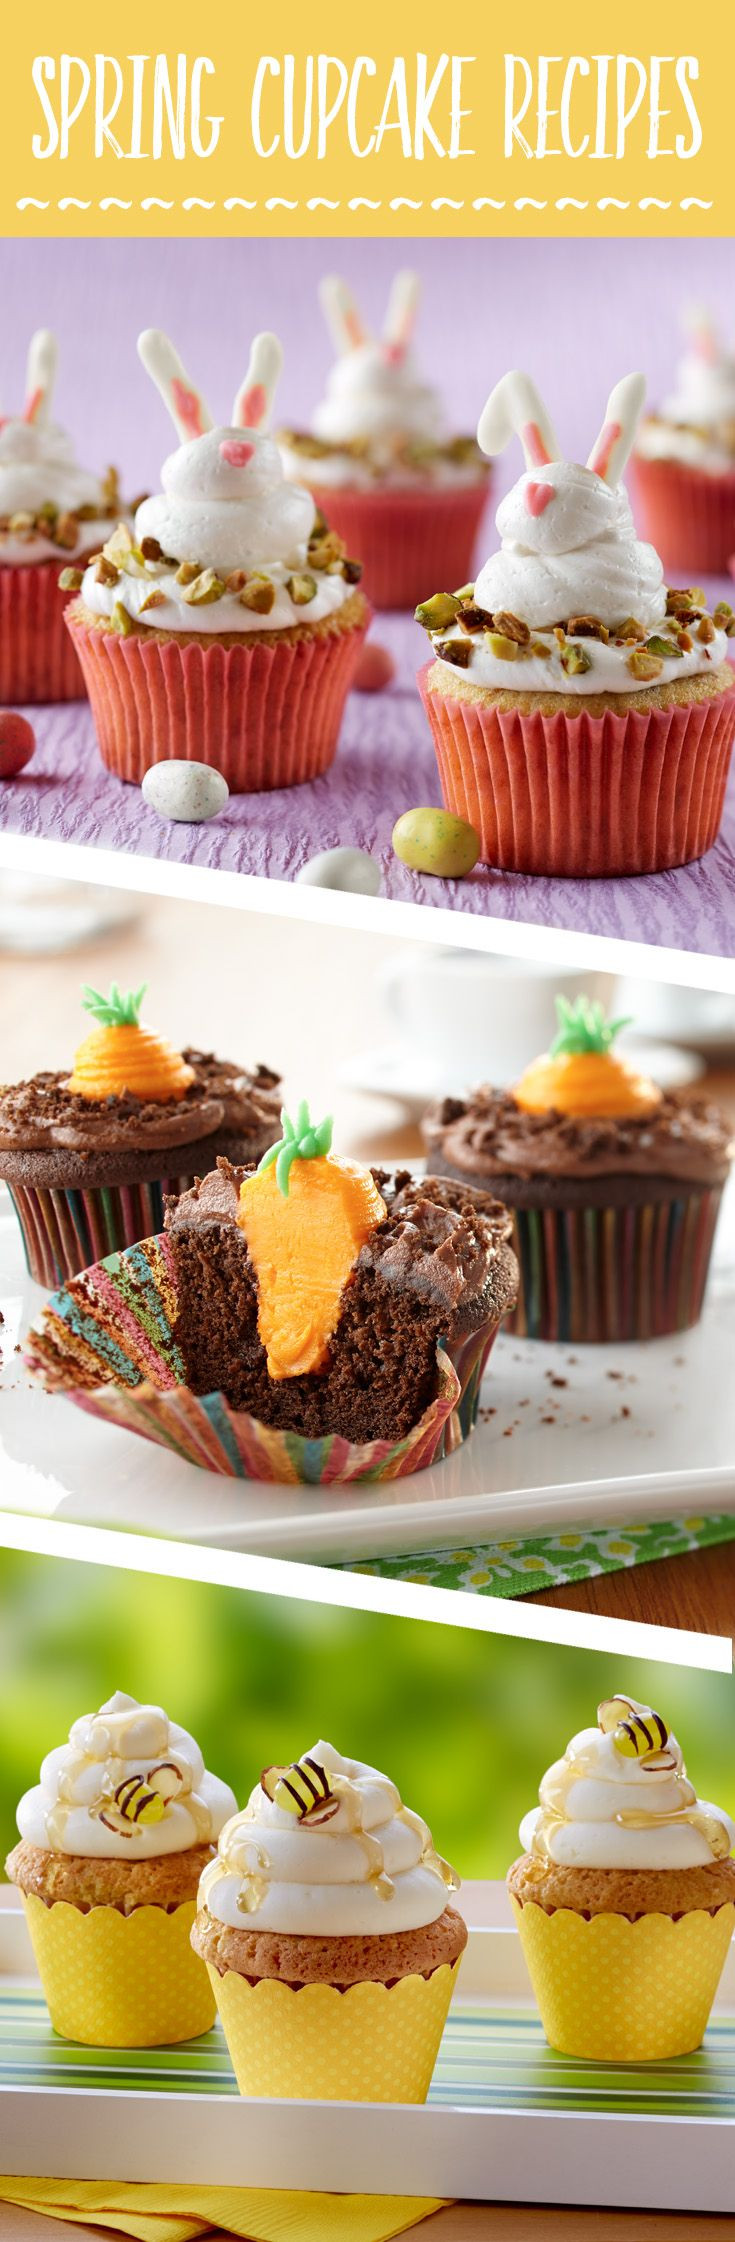 Cupcake Easter Desserts
 Best 25 Spring cupcakes ideas on Pinterest